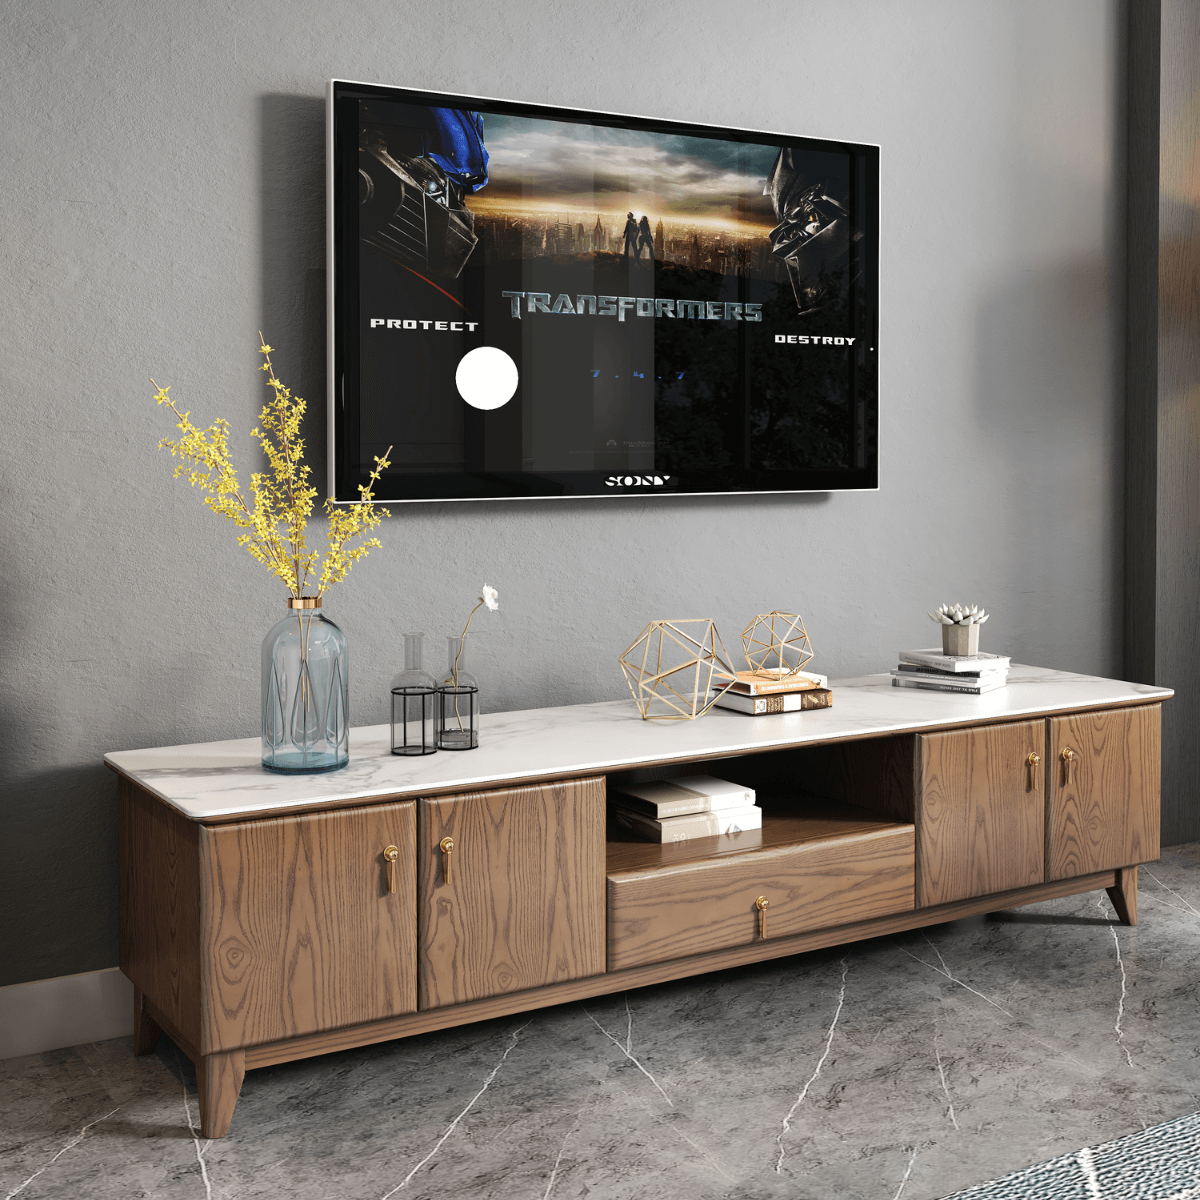 Fergus Ash Wood TV Console with Sintered Stone Top Singapore